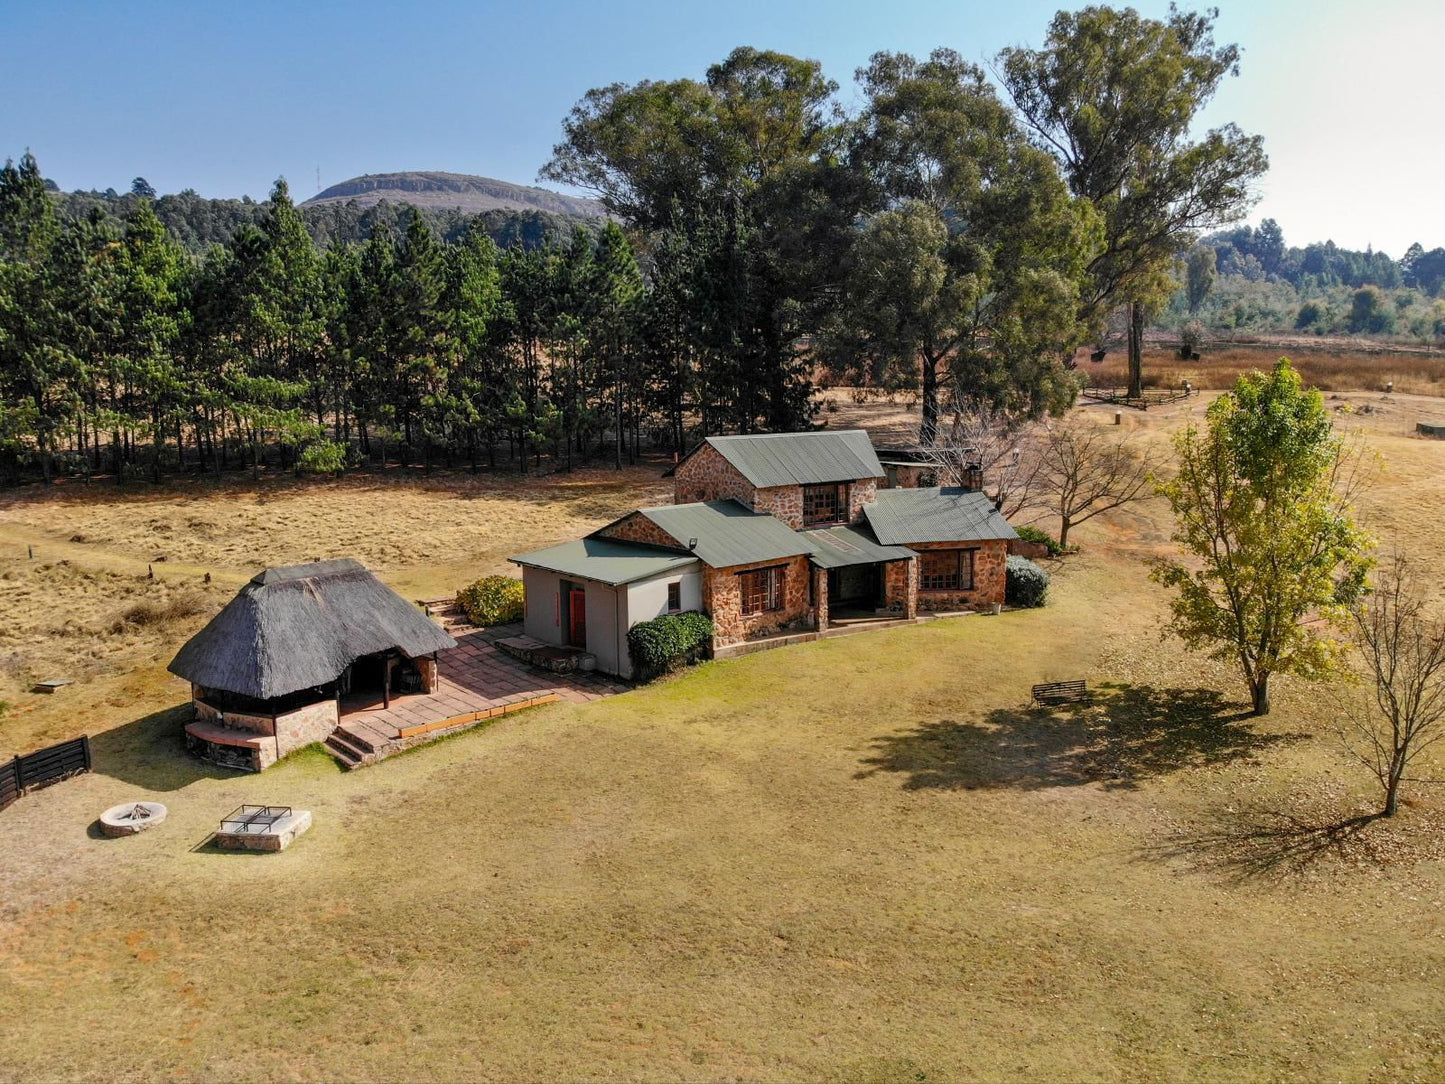 Stonecutters Lodge Dullstroom Mpumalanga South Africa Building, Architecture, Cabin